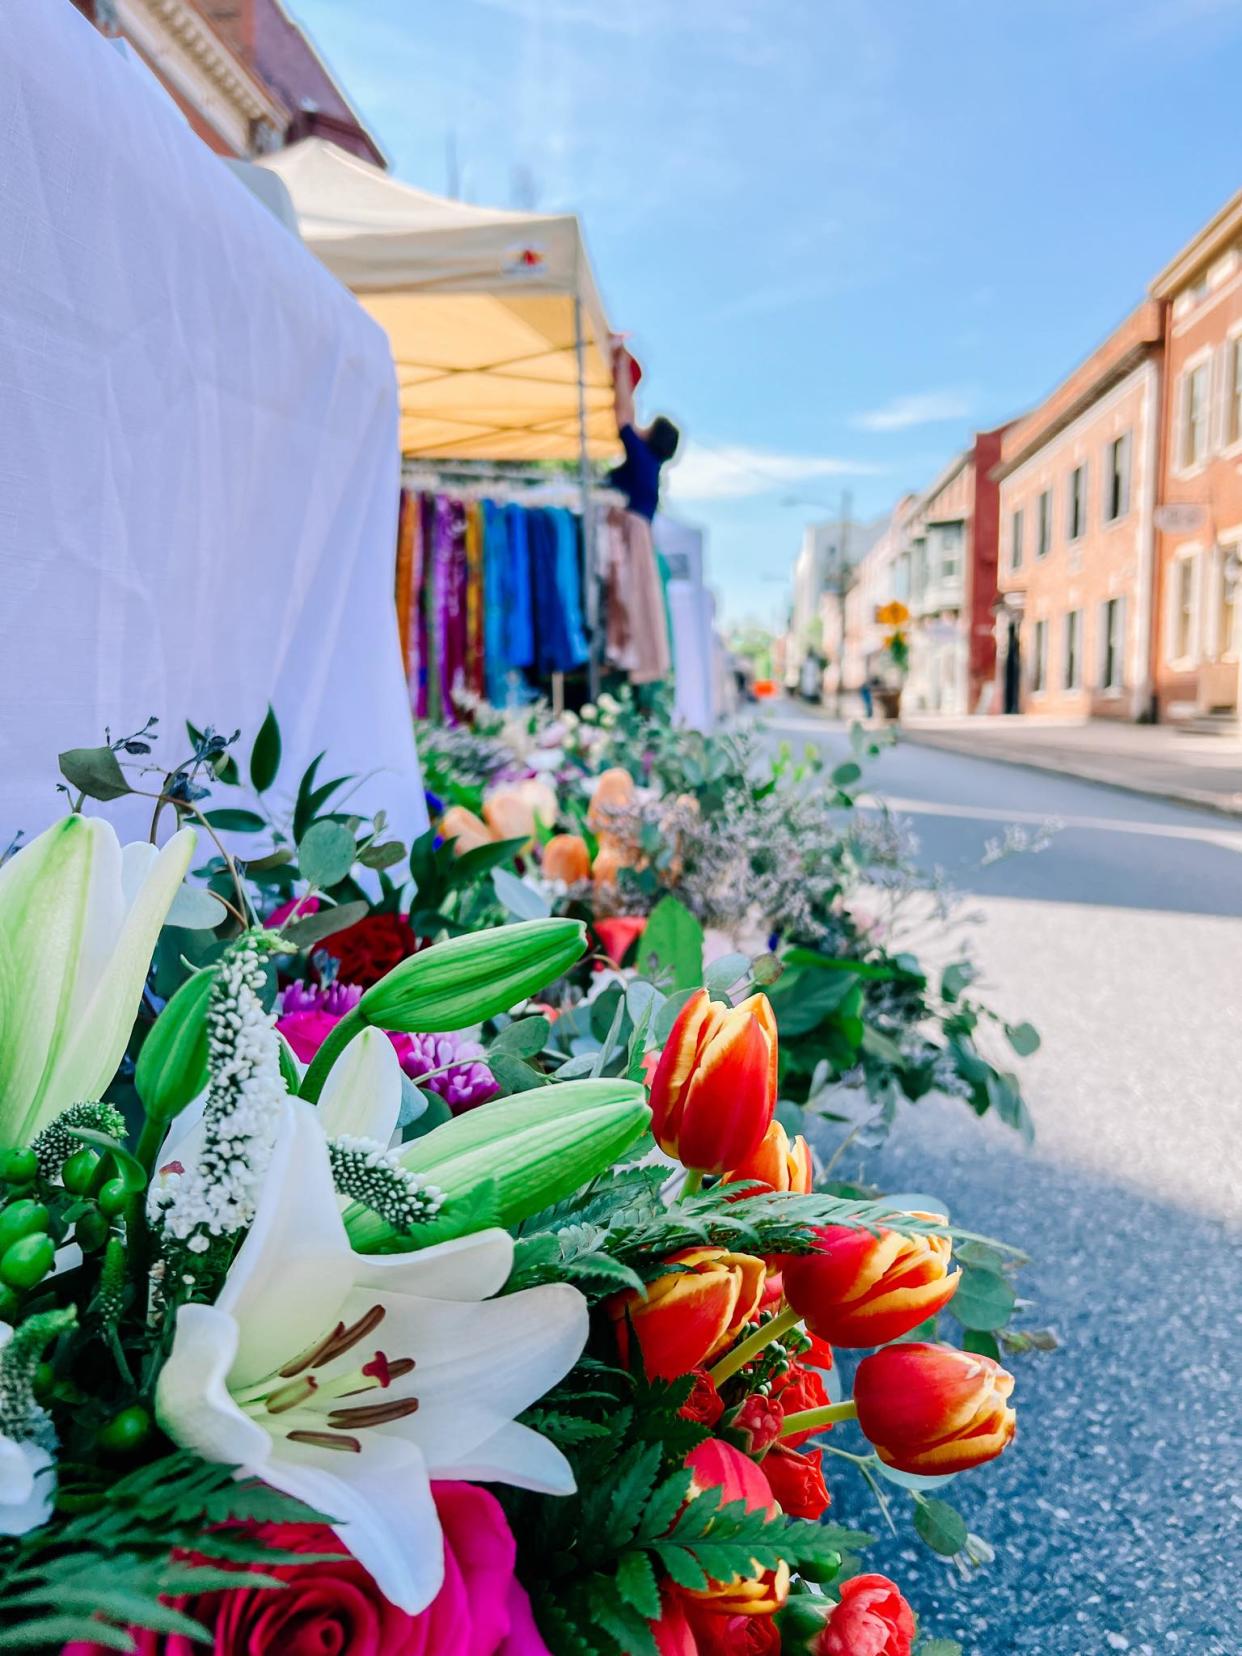 For the third year in a row, The Mother’s Day Outdoor Market will take place on North Beaver Street between West Philadelphia and West Market Street (between White Rose Bar & Grill and Holy Hound Taproom) from 10 a.m. to 3 p.m.